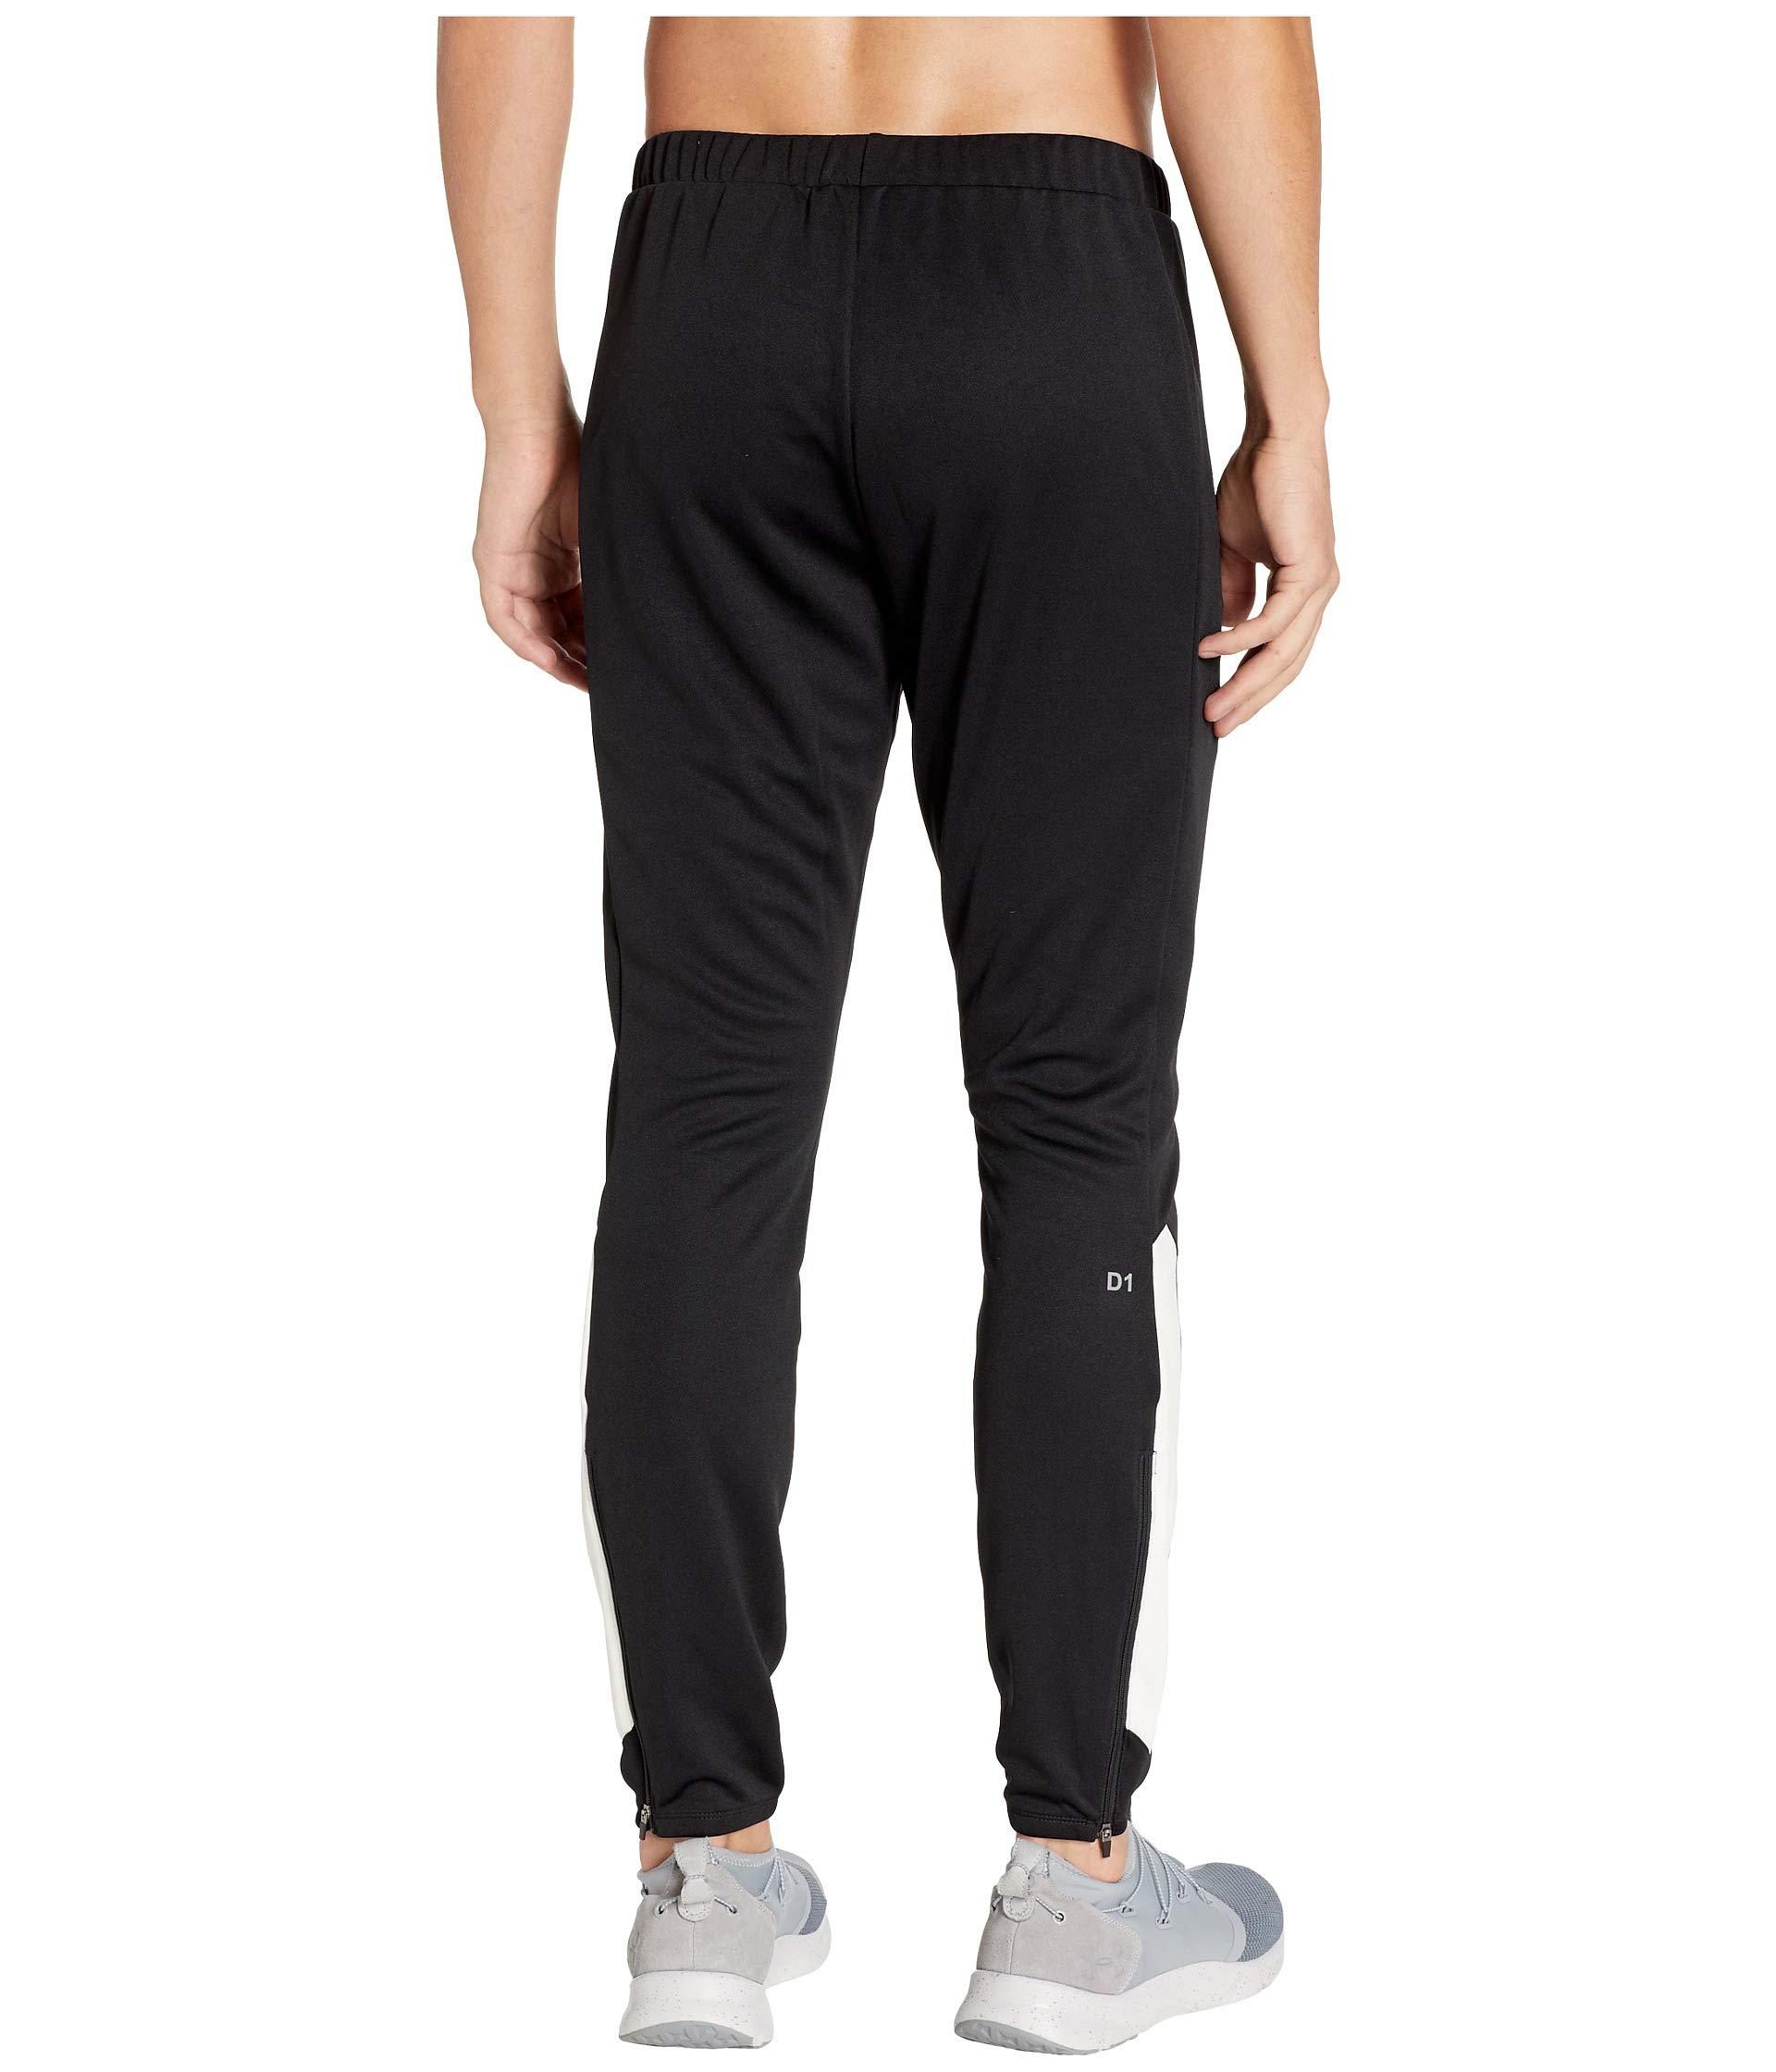 Asics Synthetic Entry Zip Cuff Track Pants in Black for Men - Lyst